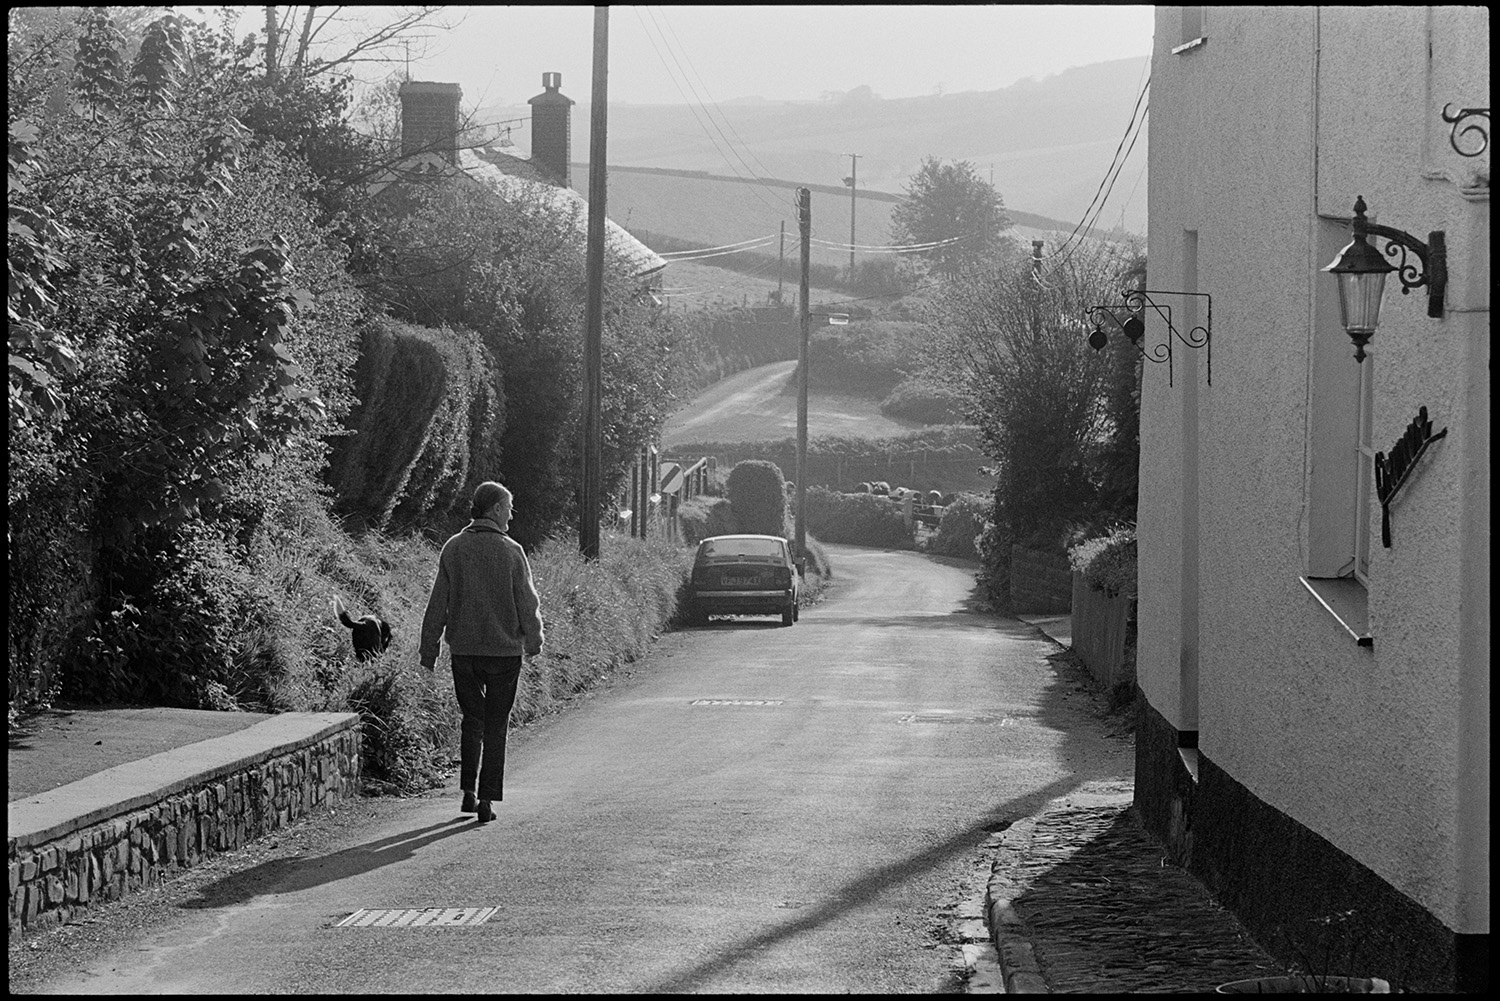 Early morning, postman's round. Dustbin refuse bags in street. Cars passing and pony.
[A woman walking down the hill with her dog in morning sunshine at East Street, Chulmleigh. Se is passing a house with brackets for hanging baskets outside. A car is parked further along the street.]